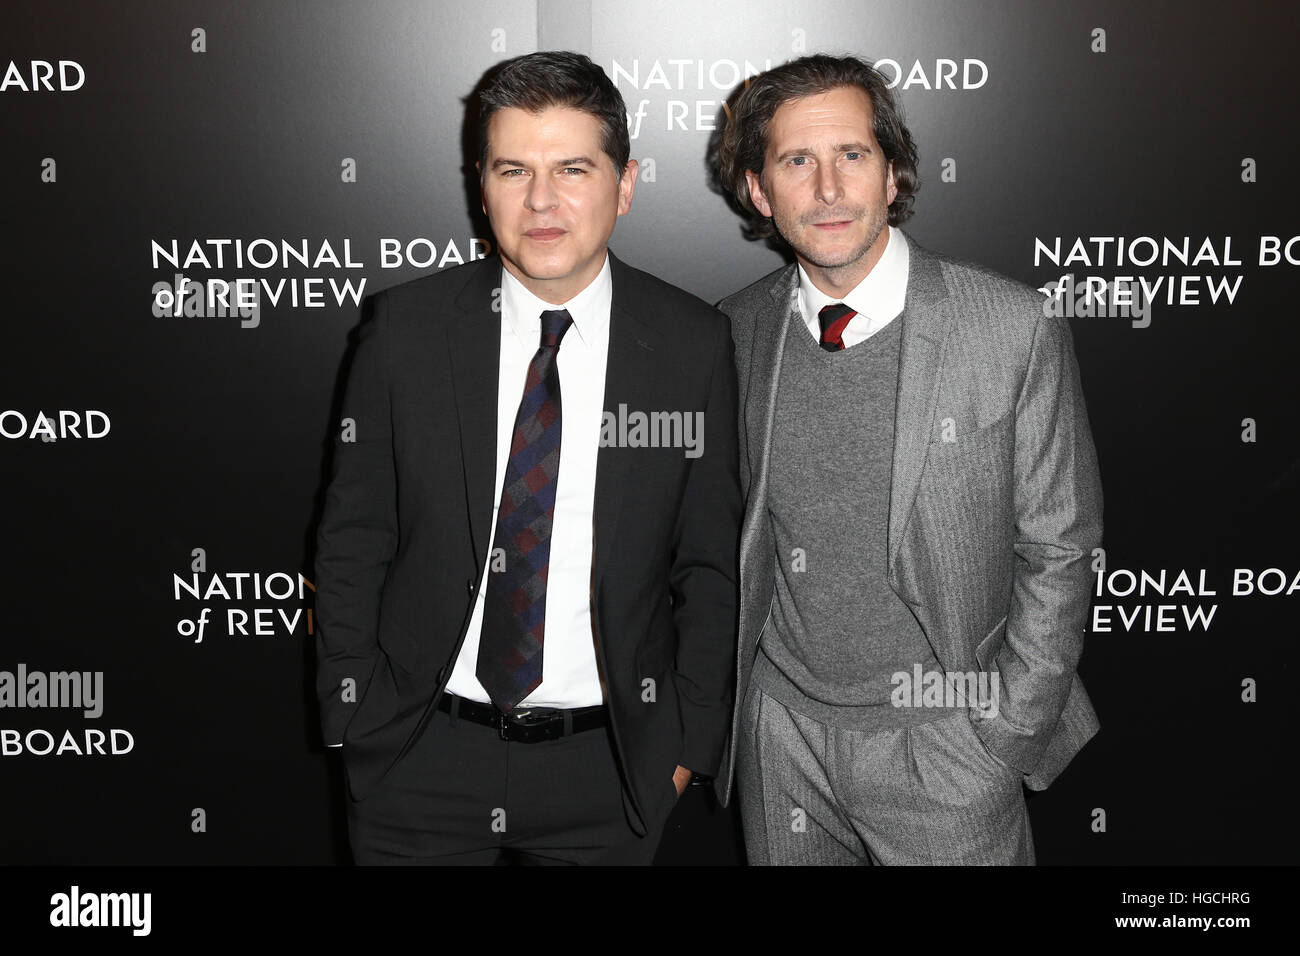 Producers Dan Levine (L) and Aaron Ryder attend National Board of Review at Cipriani Wall Street in New York on January 4, 2017. Stock Photo